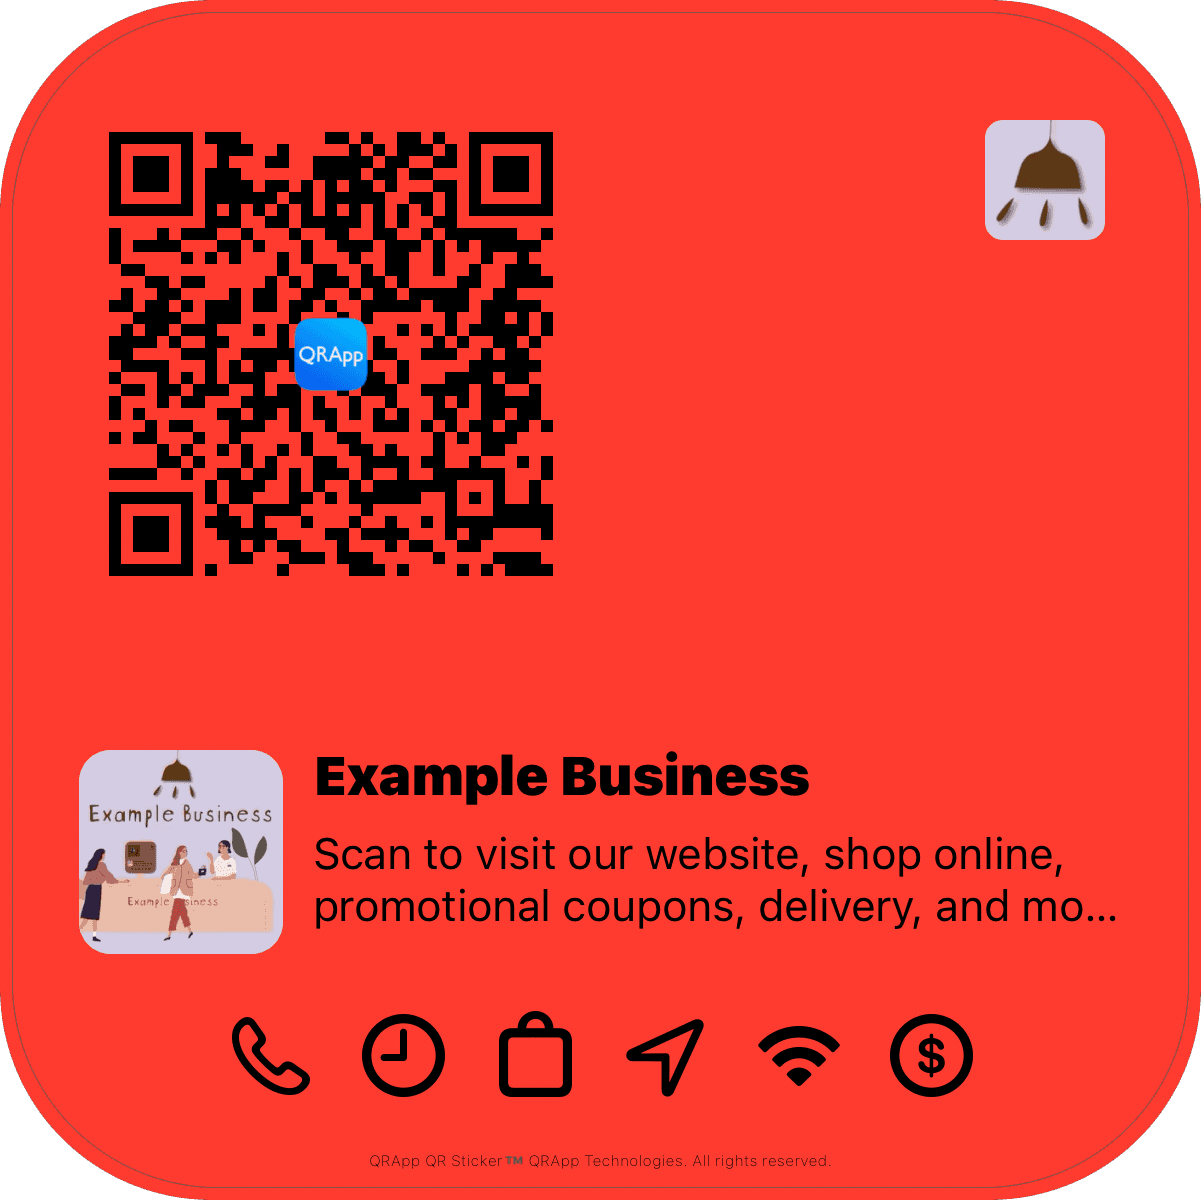 QR code for business. QRApp business QR code integrates a single QR code to access your business website, social media sites, address,
        phone number, business hours and many more important information within a single QR code. 